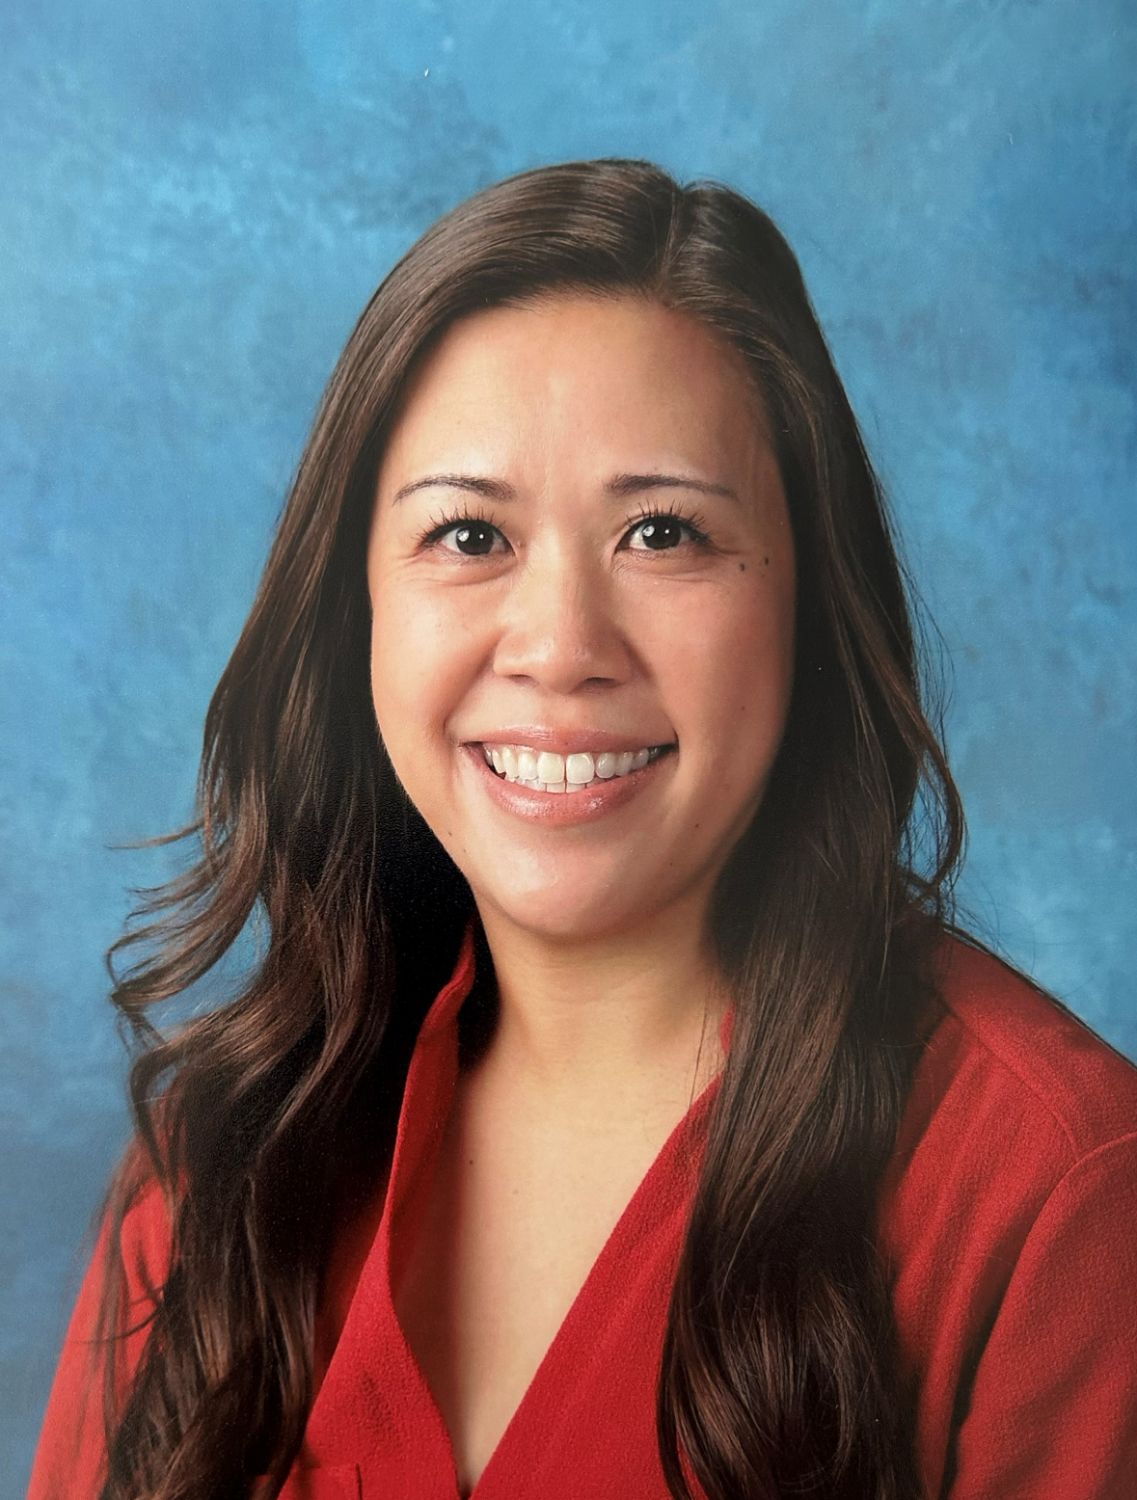 PHOTO: provided by Noelle Fong | The South Pasadenan | Noelle Fong will serve as the new principal at Marengo Elementary School in South Pasadena. 